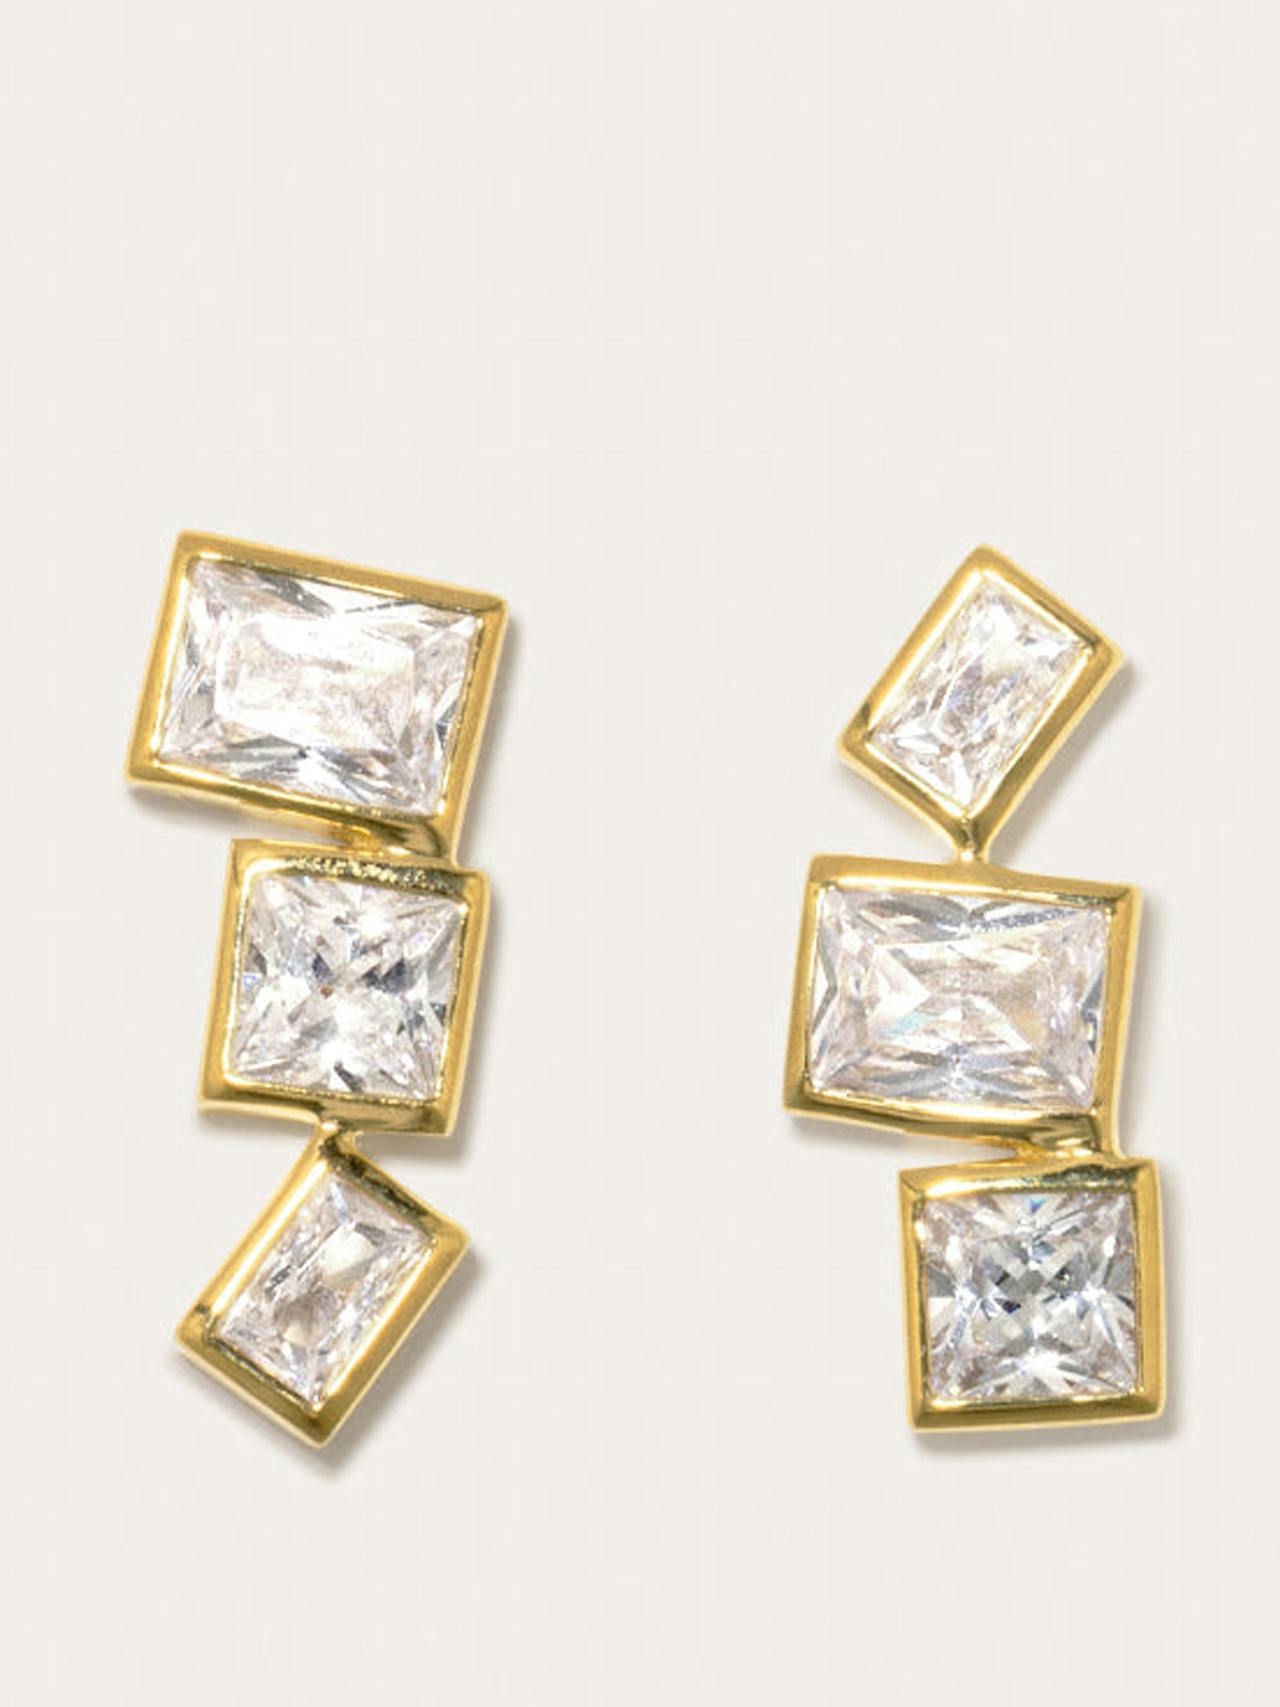 "How to Get a Low Score at Tetris" cubic zirconia and recycled gold vermeil earrings